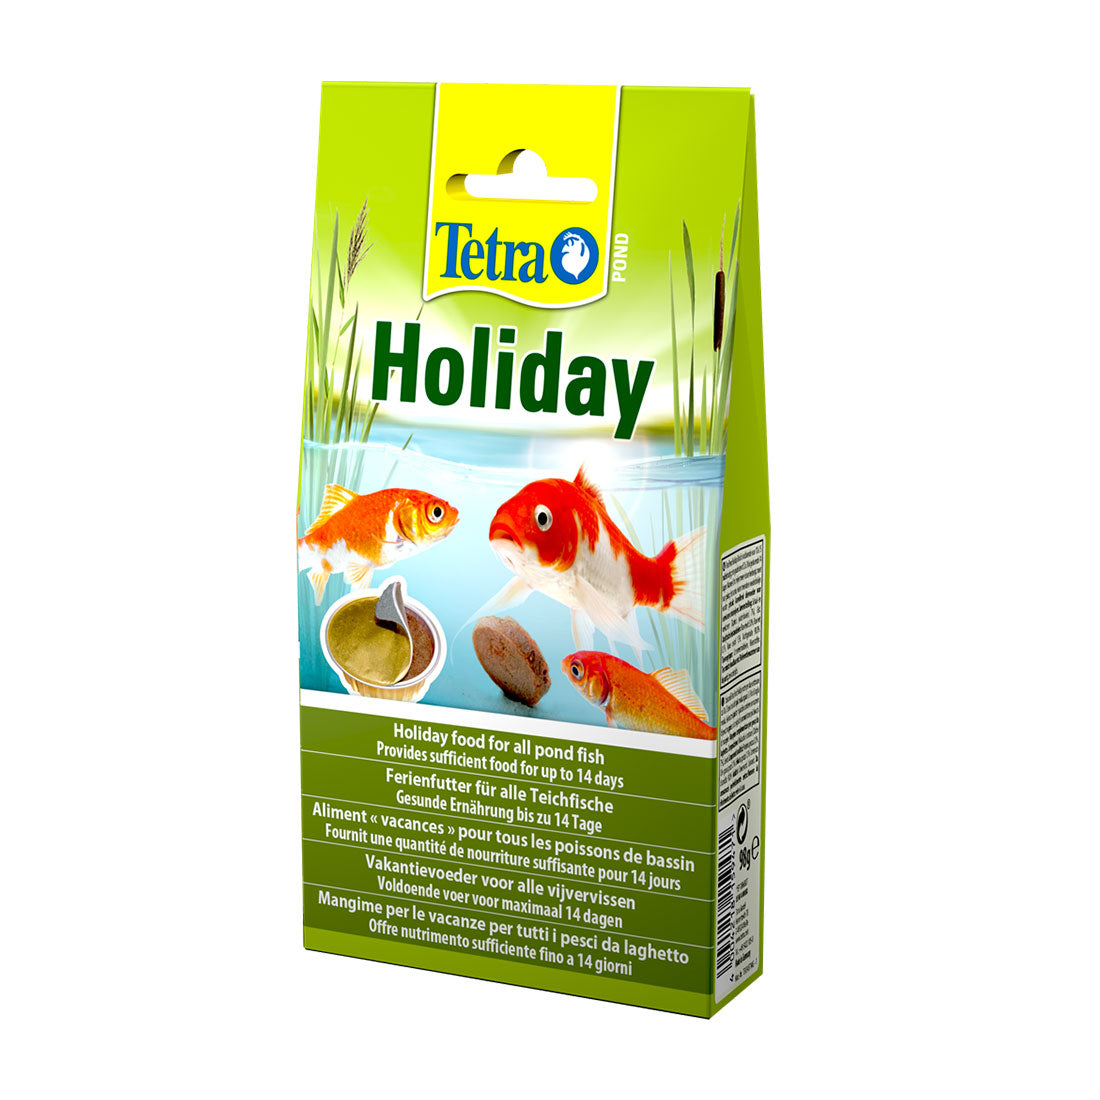 Tetra Pond Variety, 3in1 Different Fish Food Sticks for All Pond